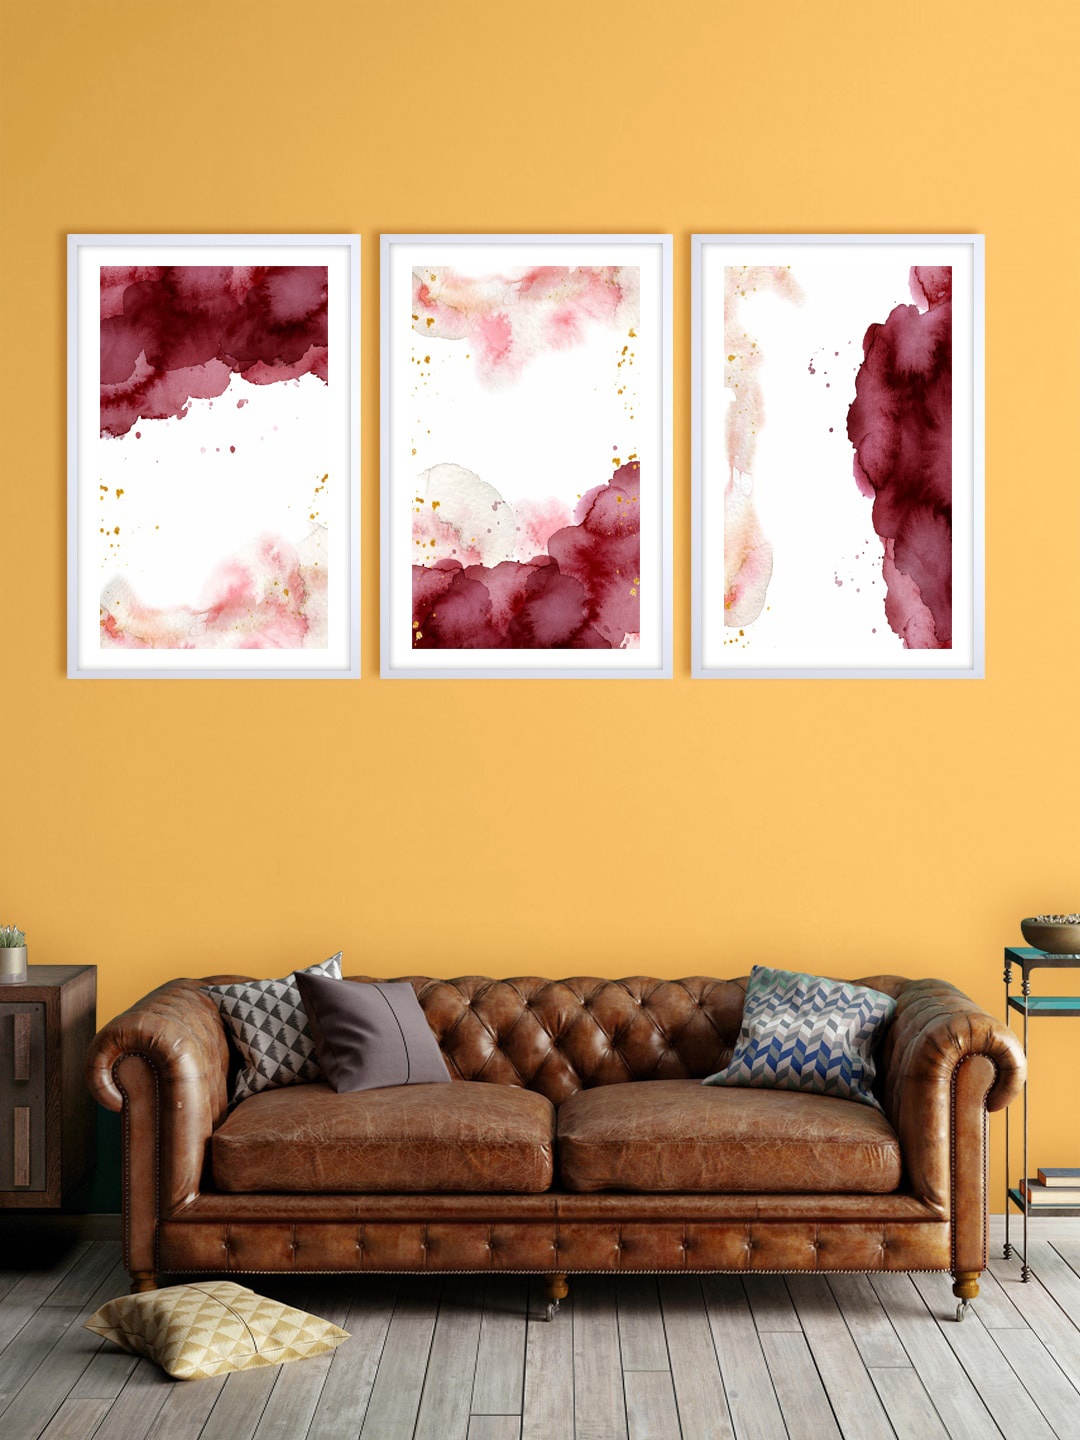 

999Store Set Of 3 White & Maroon Abstract Watercolour Printed Wall Art